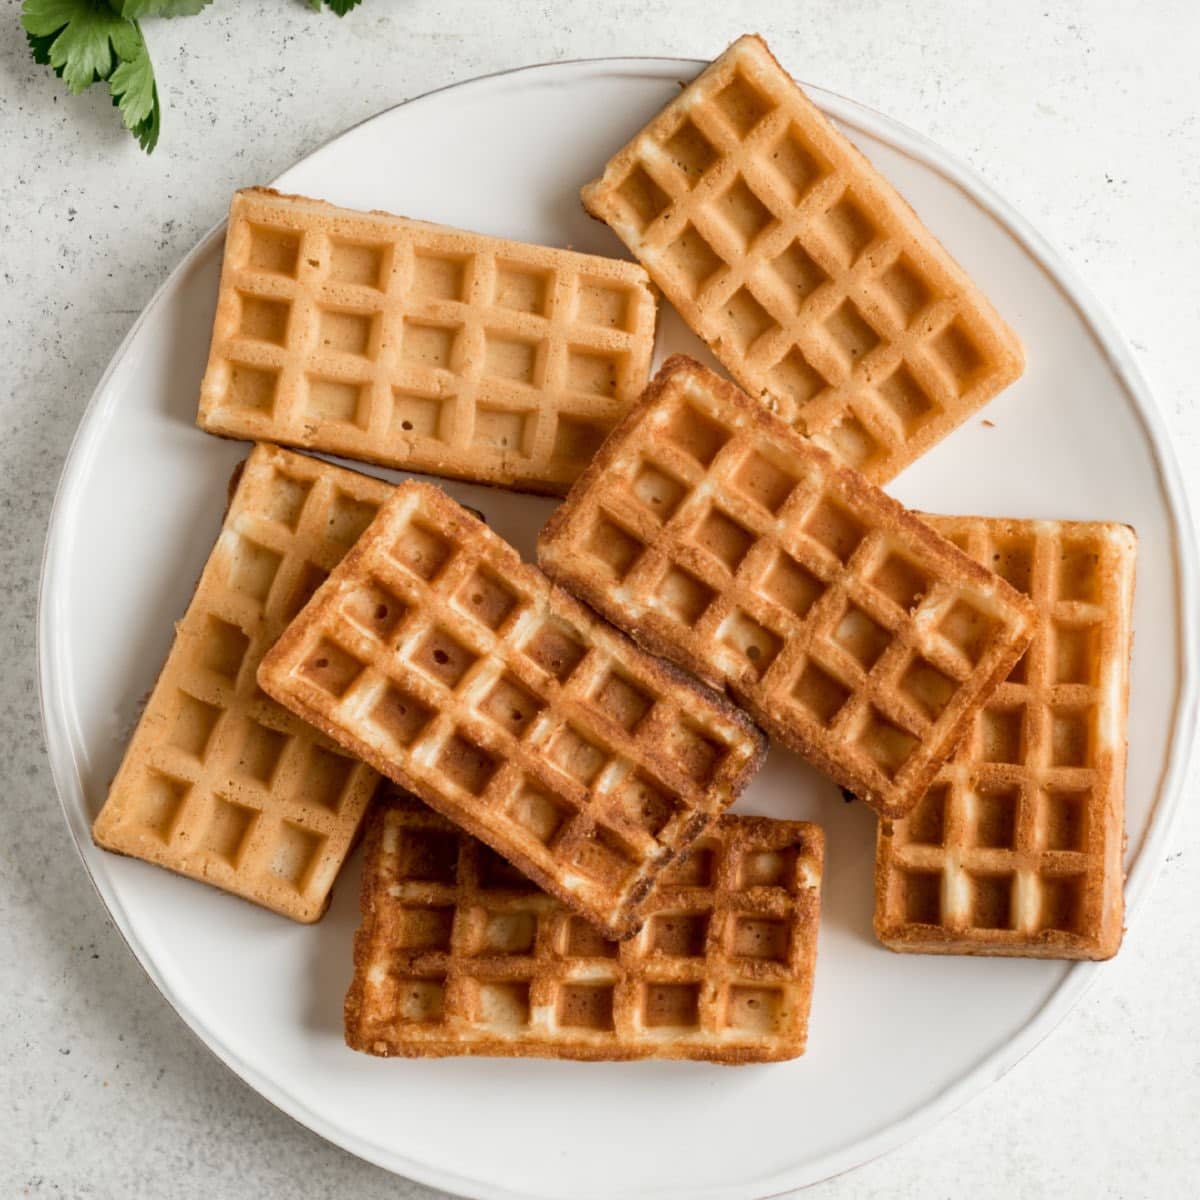 The Best Chaffle Recipe (5 Flavors, Not Eggy!) - Wholesome Yum